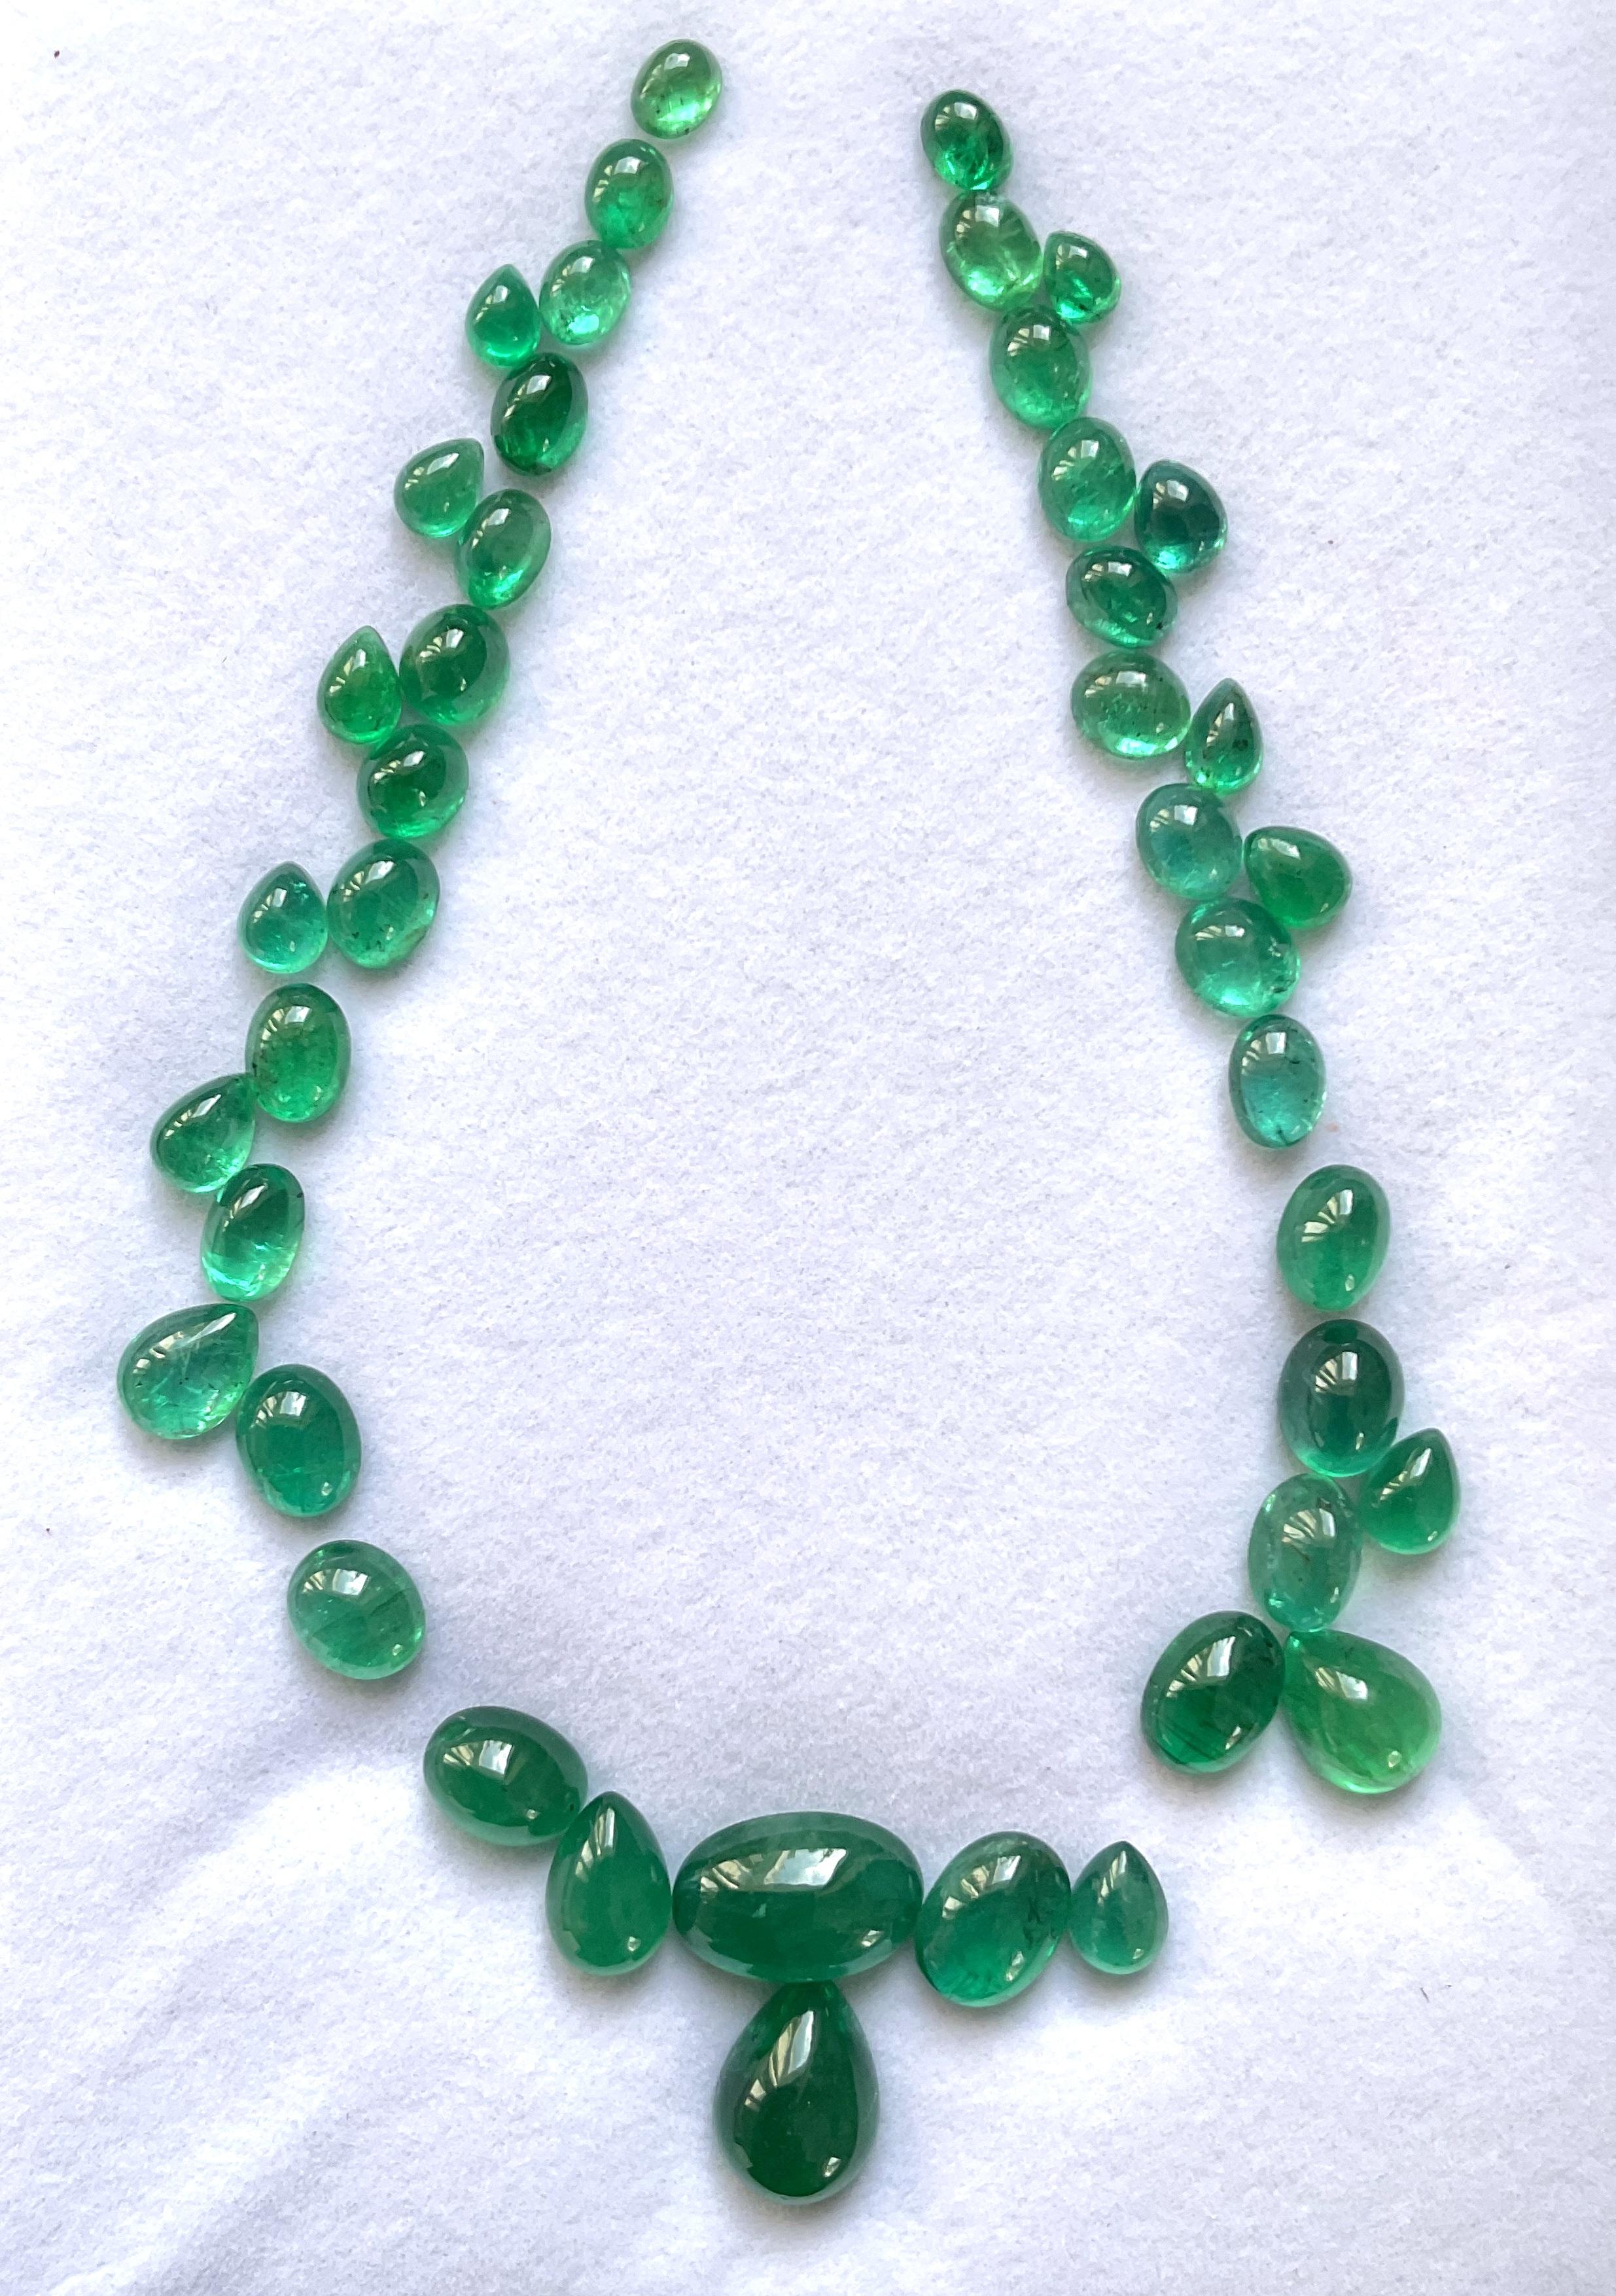 75.00 carats Zambian Emerald Plain cabochon & Pear Top Fine Layout Natural Gems
Weight: 75.00 Carats
Size: 5x4 To 10x14 MM
Pieces: 43
Shape: cabochon & Pear